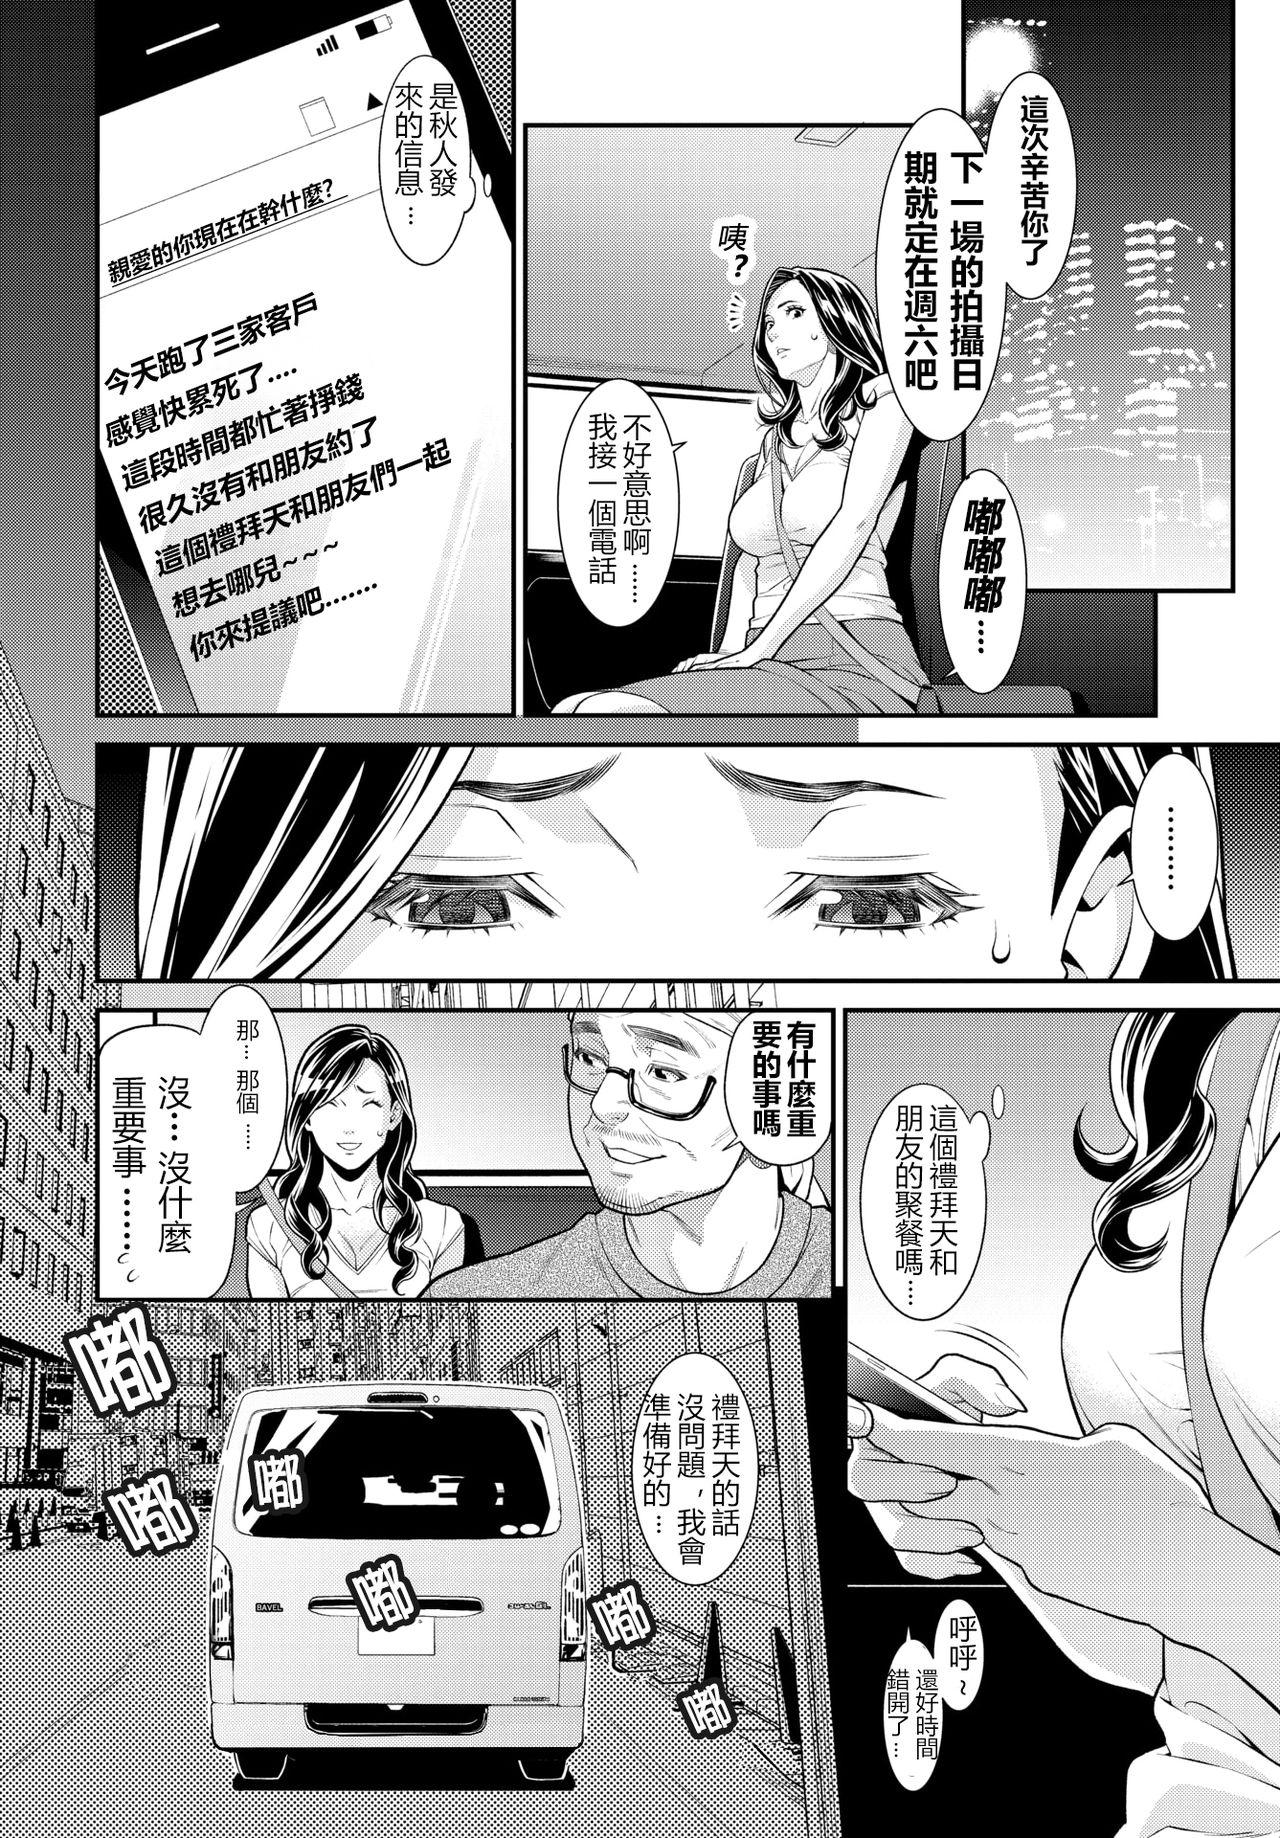 End of the Secret Wife 1-6 (no-code version) 鼠灣漢化 (210214 update) 極品人妻 NTR (117 pages)-第1章-图片41